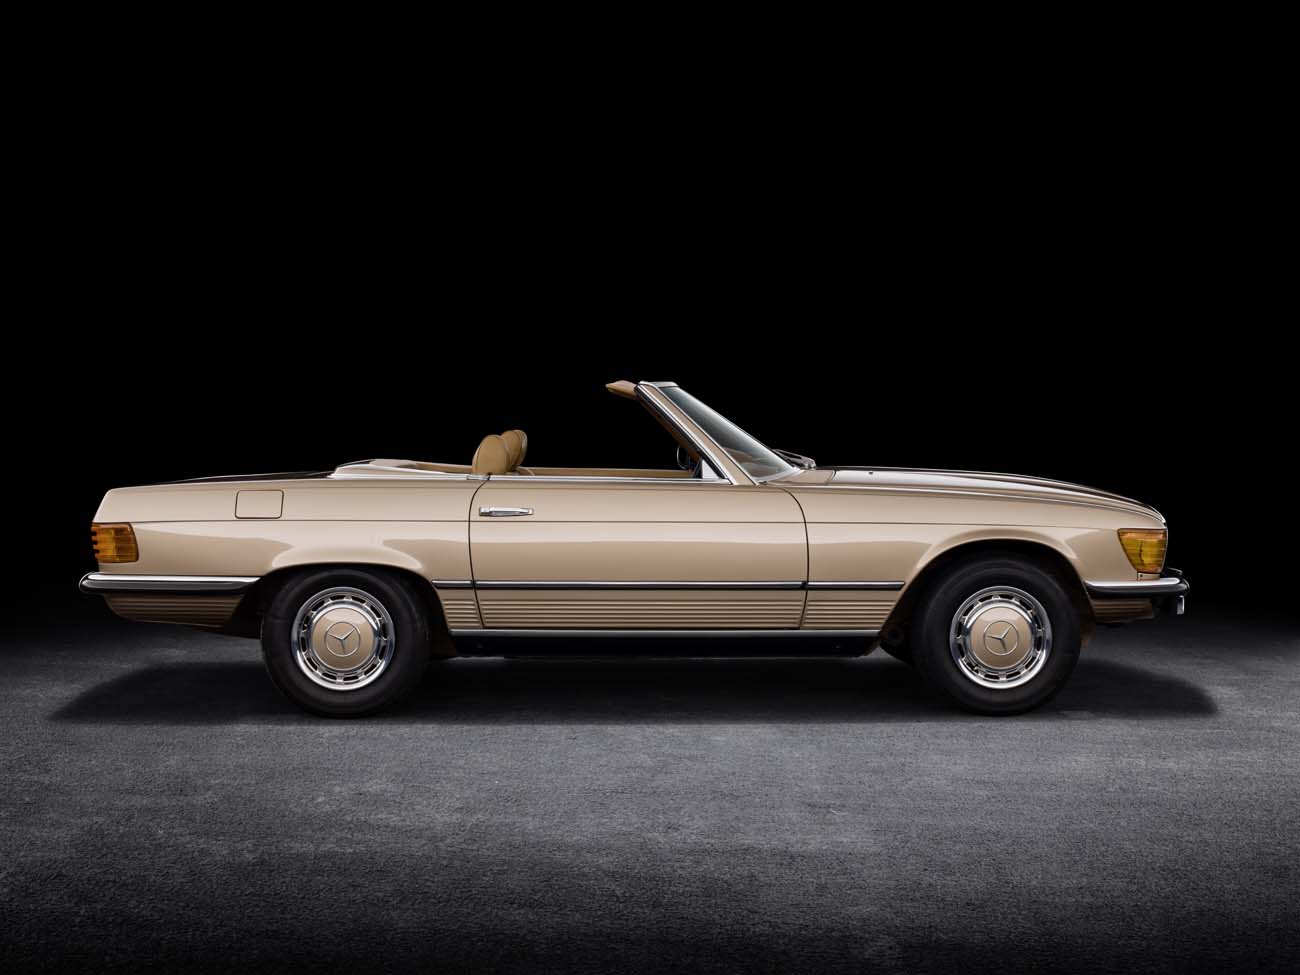 Mercedes-Benz SL of the R 107 model series: Premiere 50 years ago in April 1971